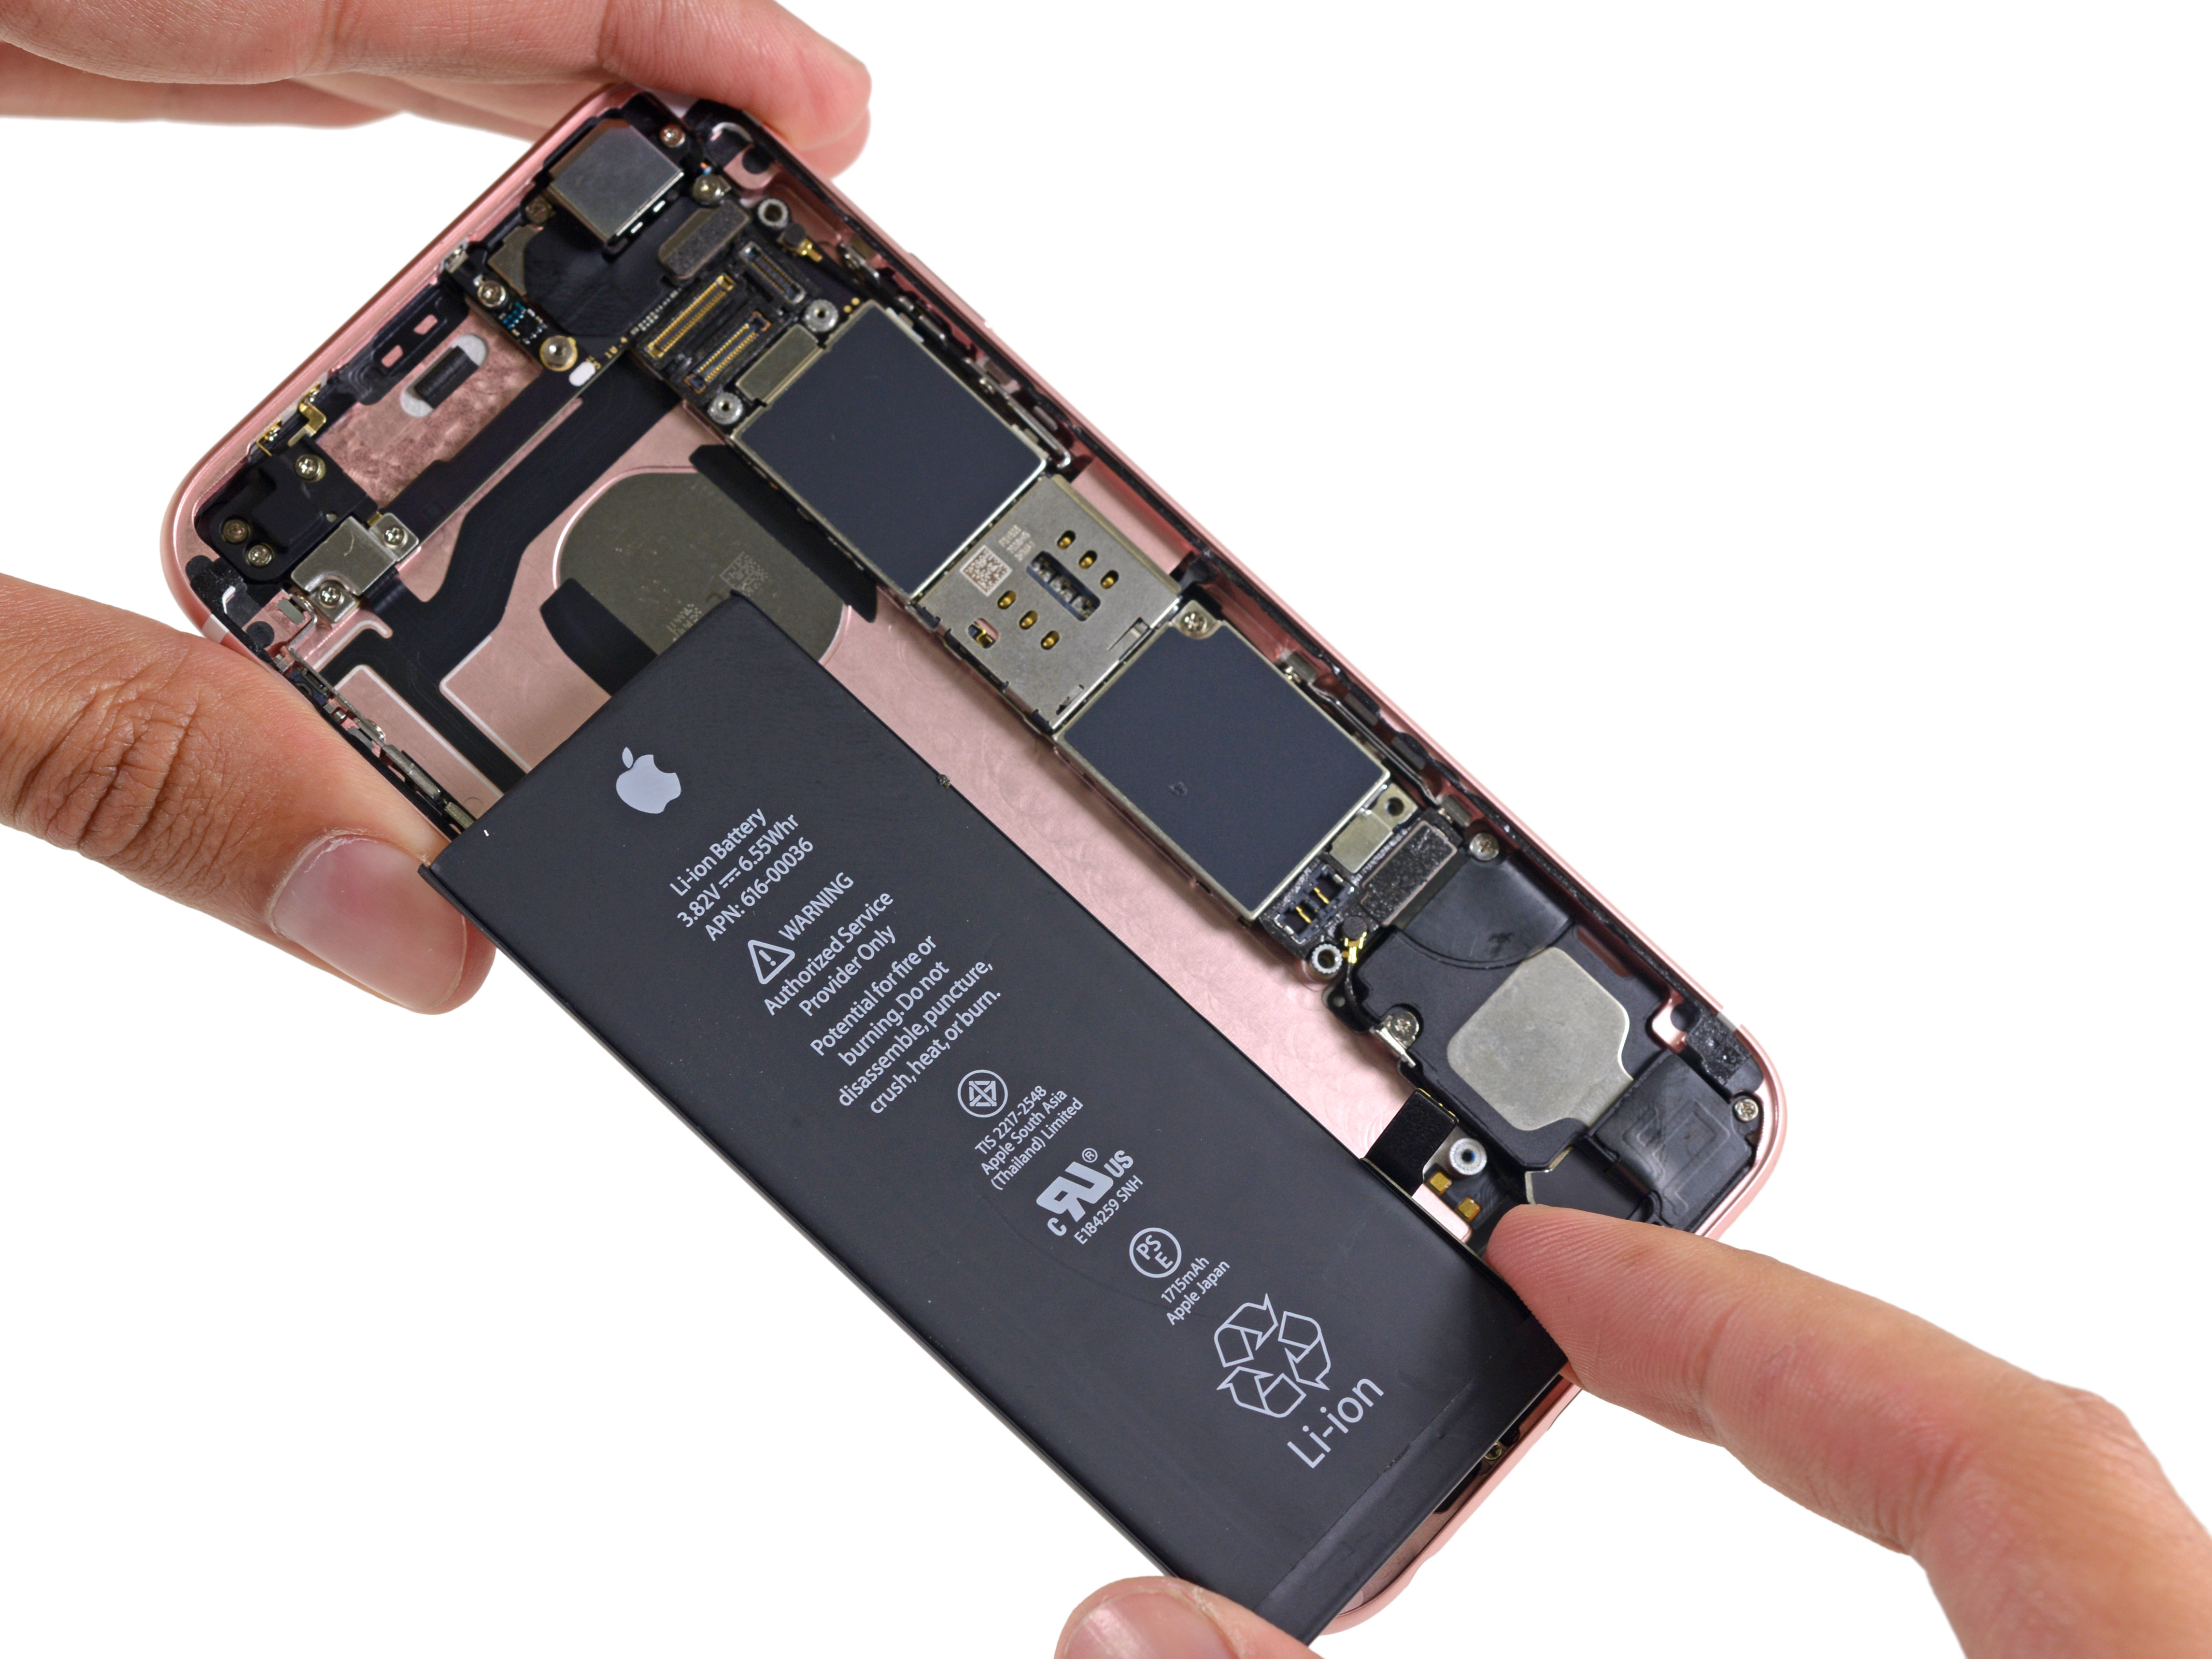 Replacement battery. Iphone 6s Battery. Iphone 6. Iphone 6s Battery Replacement. Батарея айфон 6.